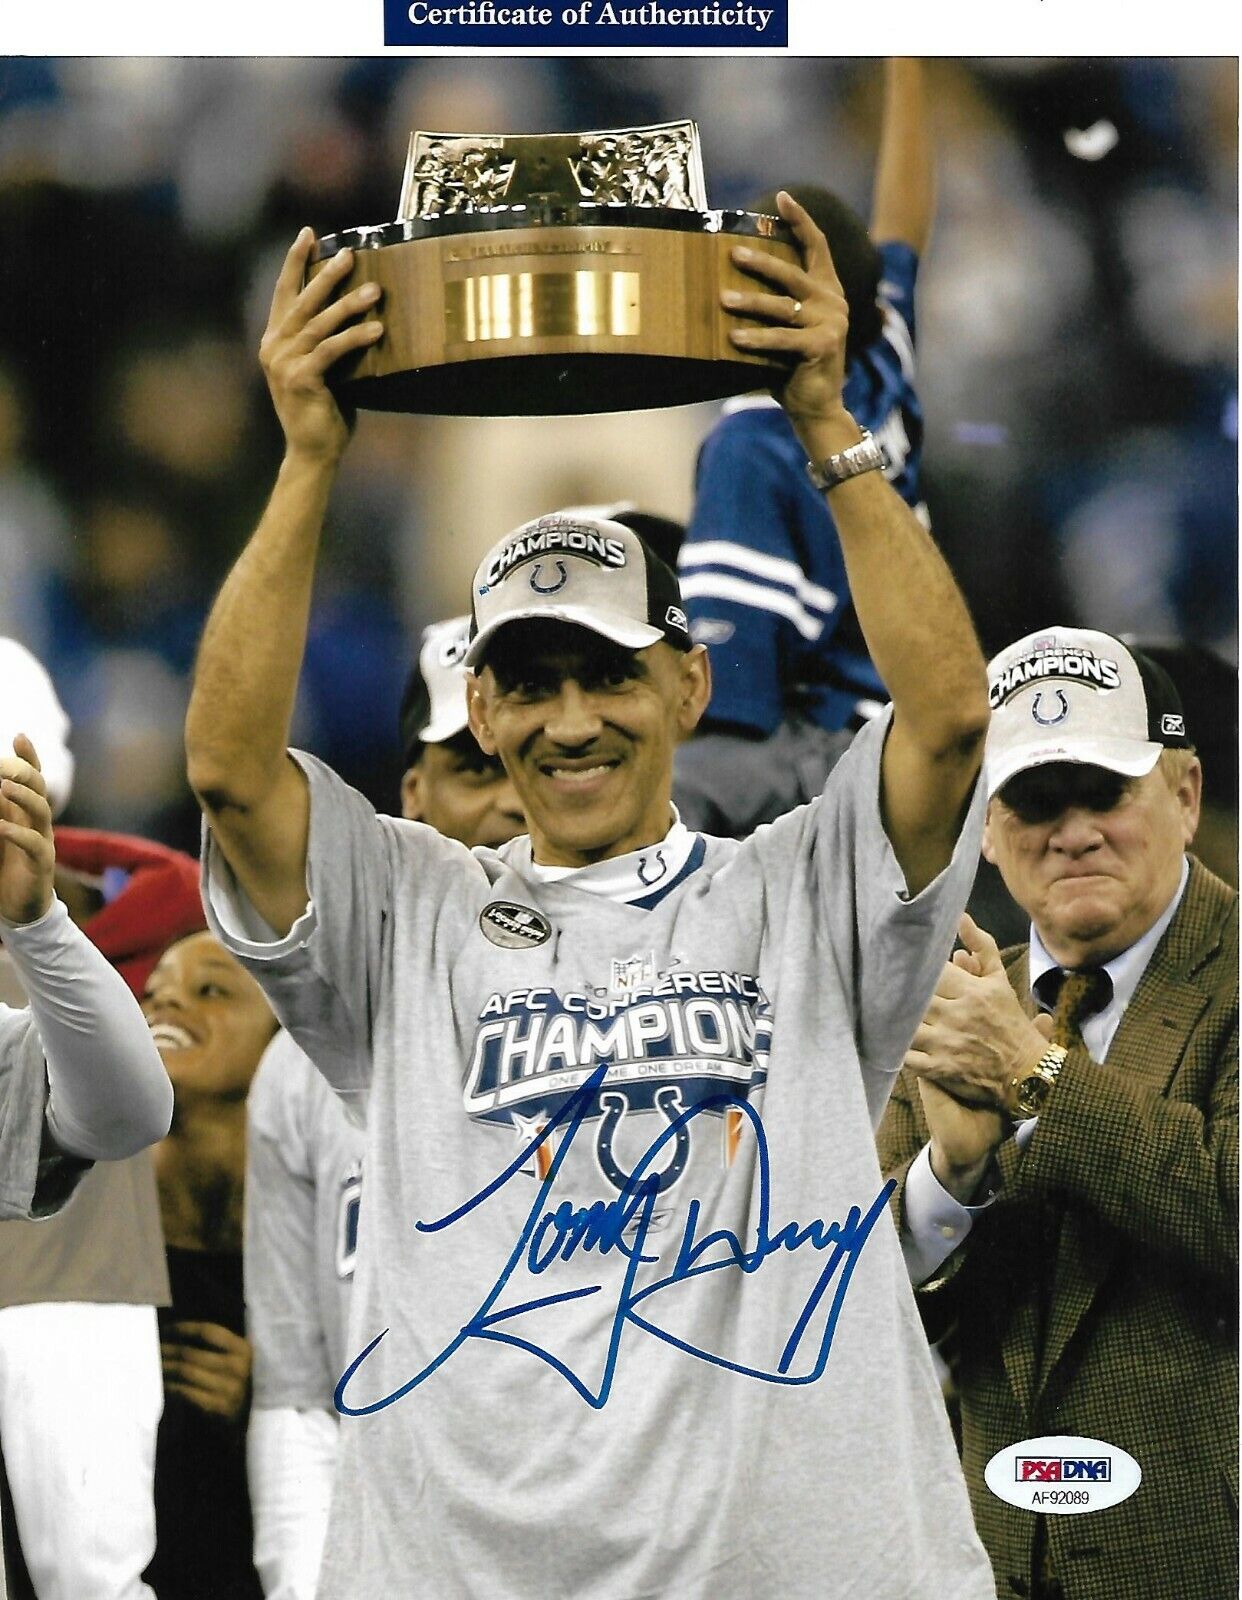 TONY DUNGY signed autographed INDIANAPOLIS COLTS 8X10 Photo Poster painting HOF COA PSA AF92089